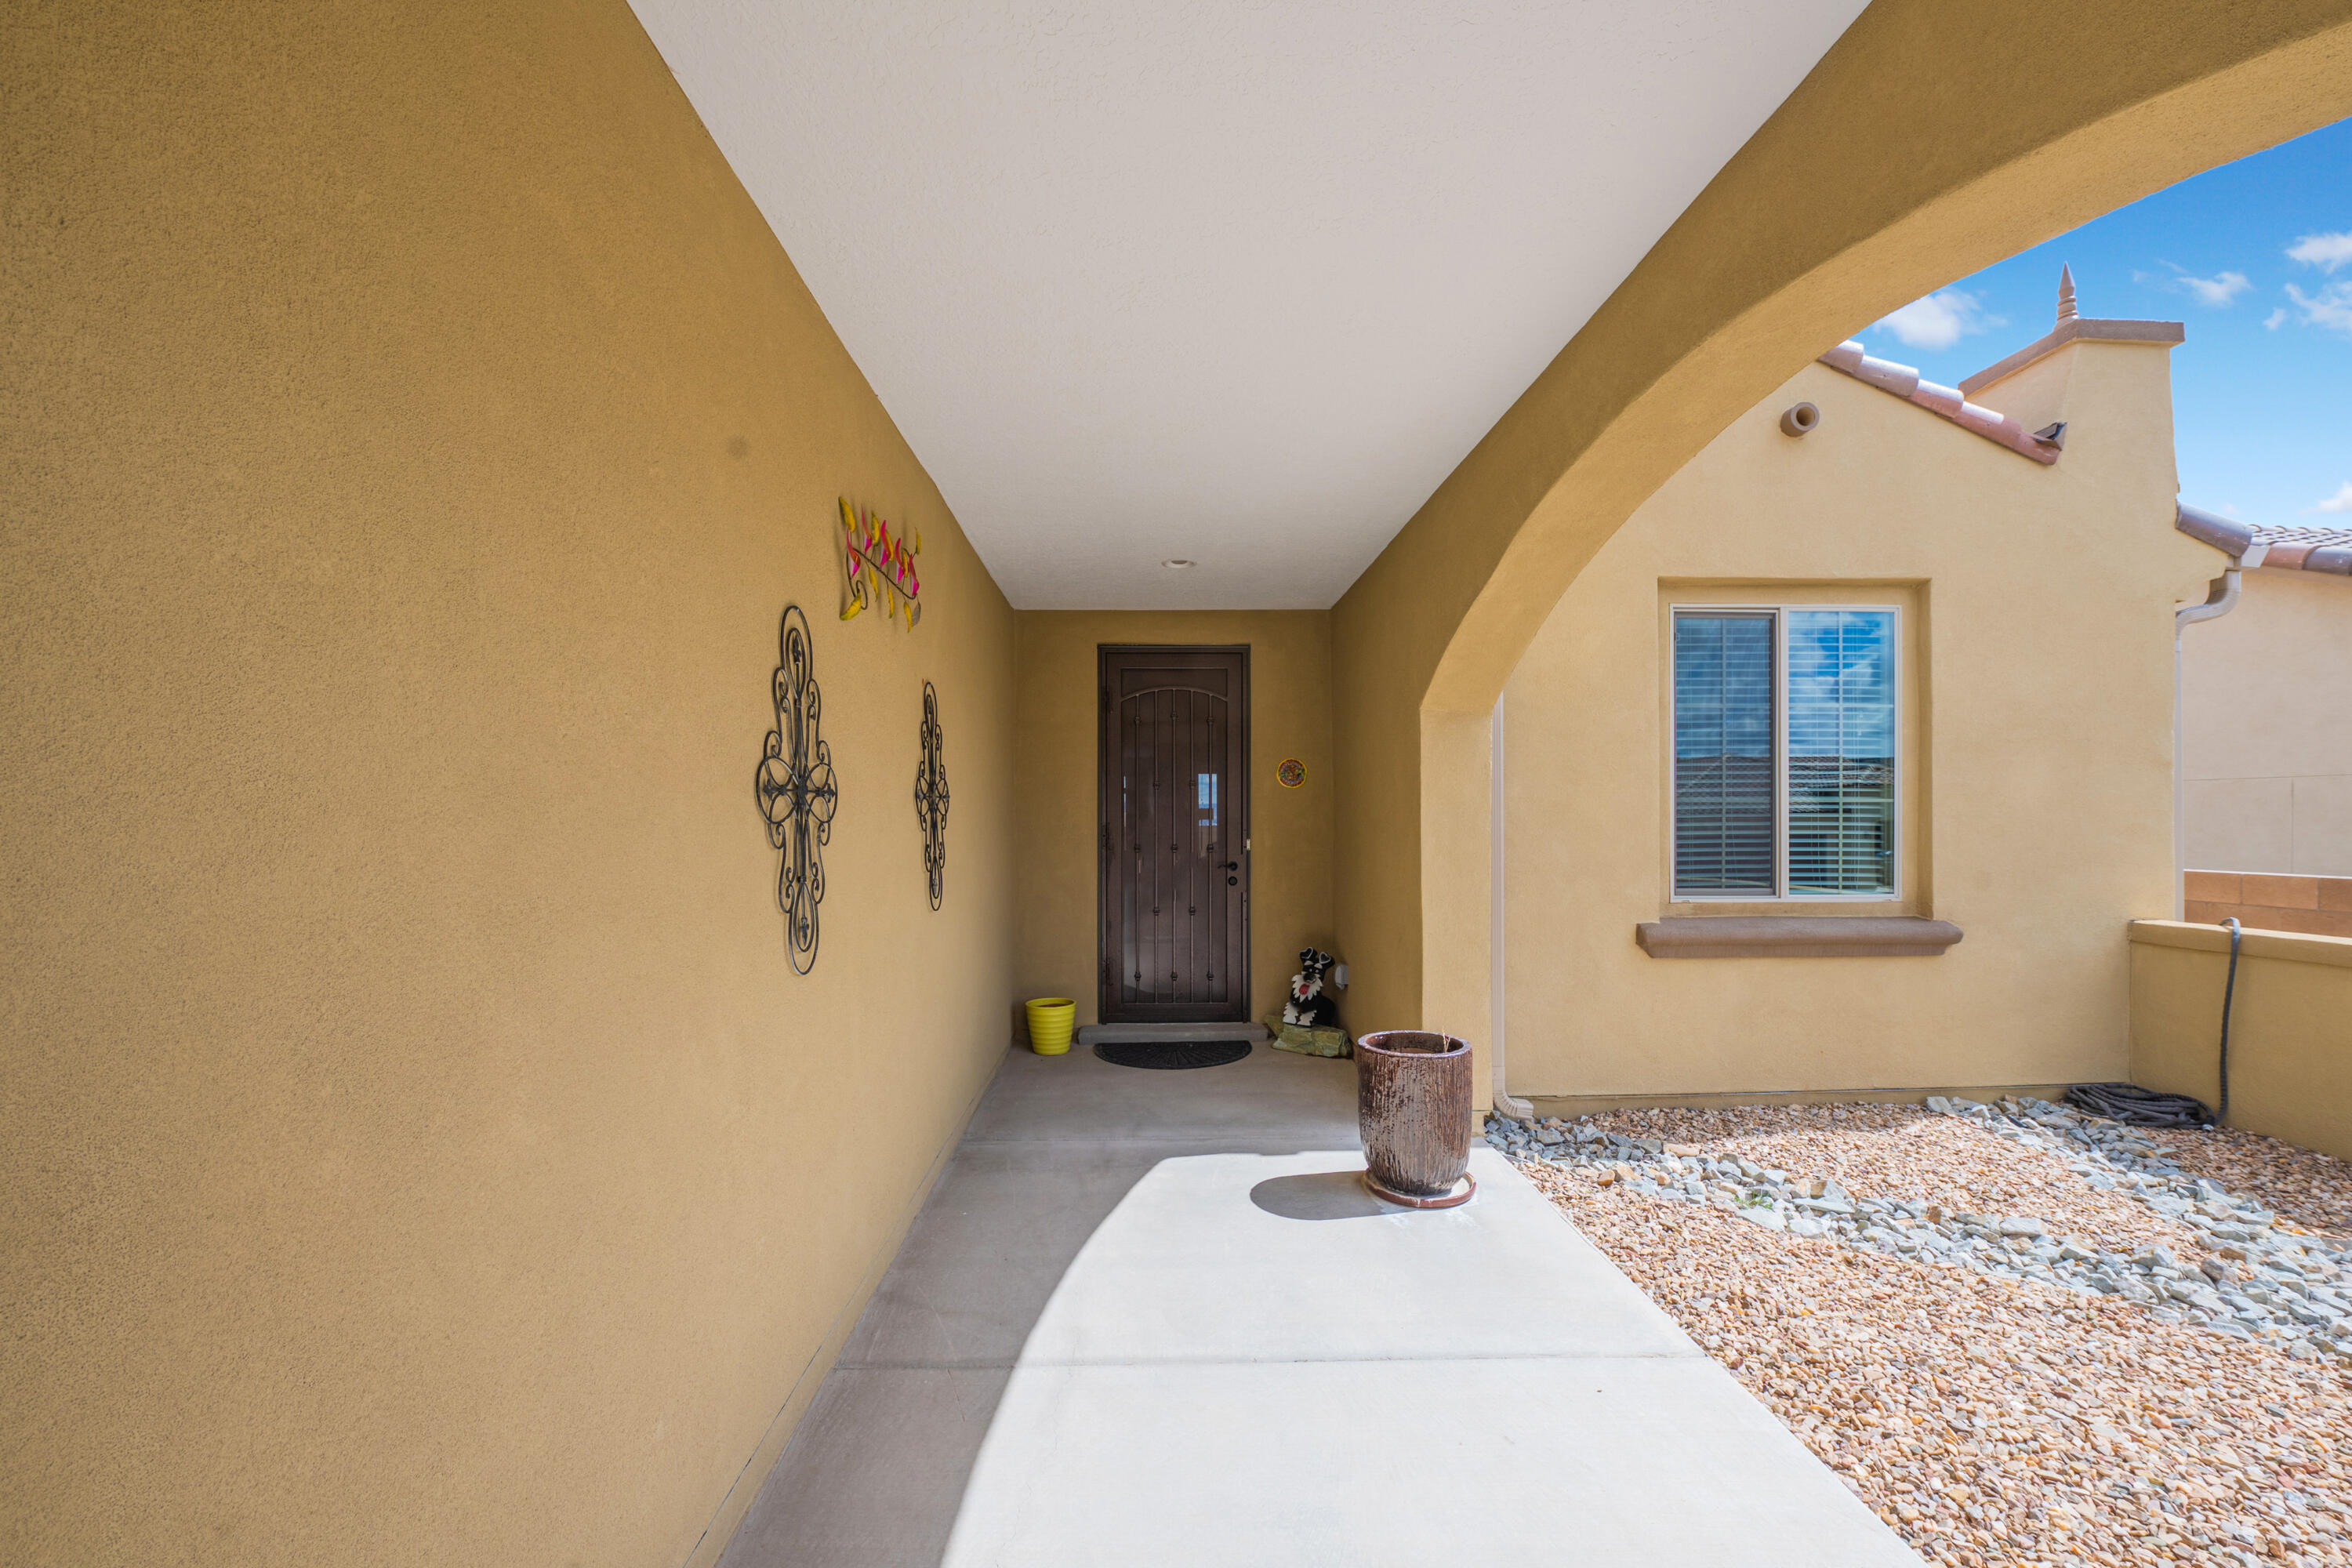 2304 Komatke Trail NW, Albuquerque, New Mexico 87120, 2 Bedrooms Bedrooms, ,2 BathroomsBathrooms,Residential,For Sale,2304 Komatke Trail NW,1059469